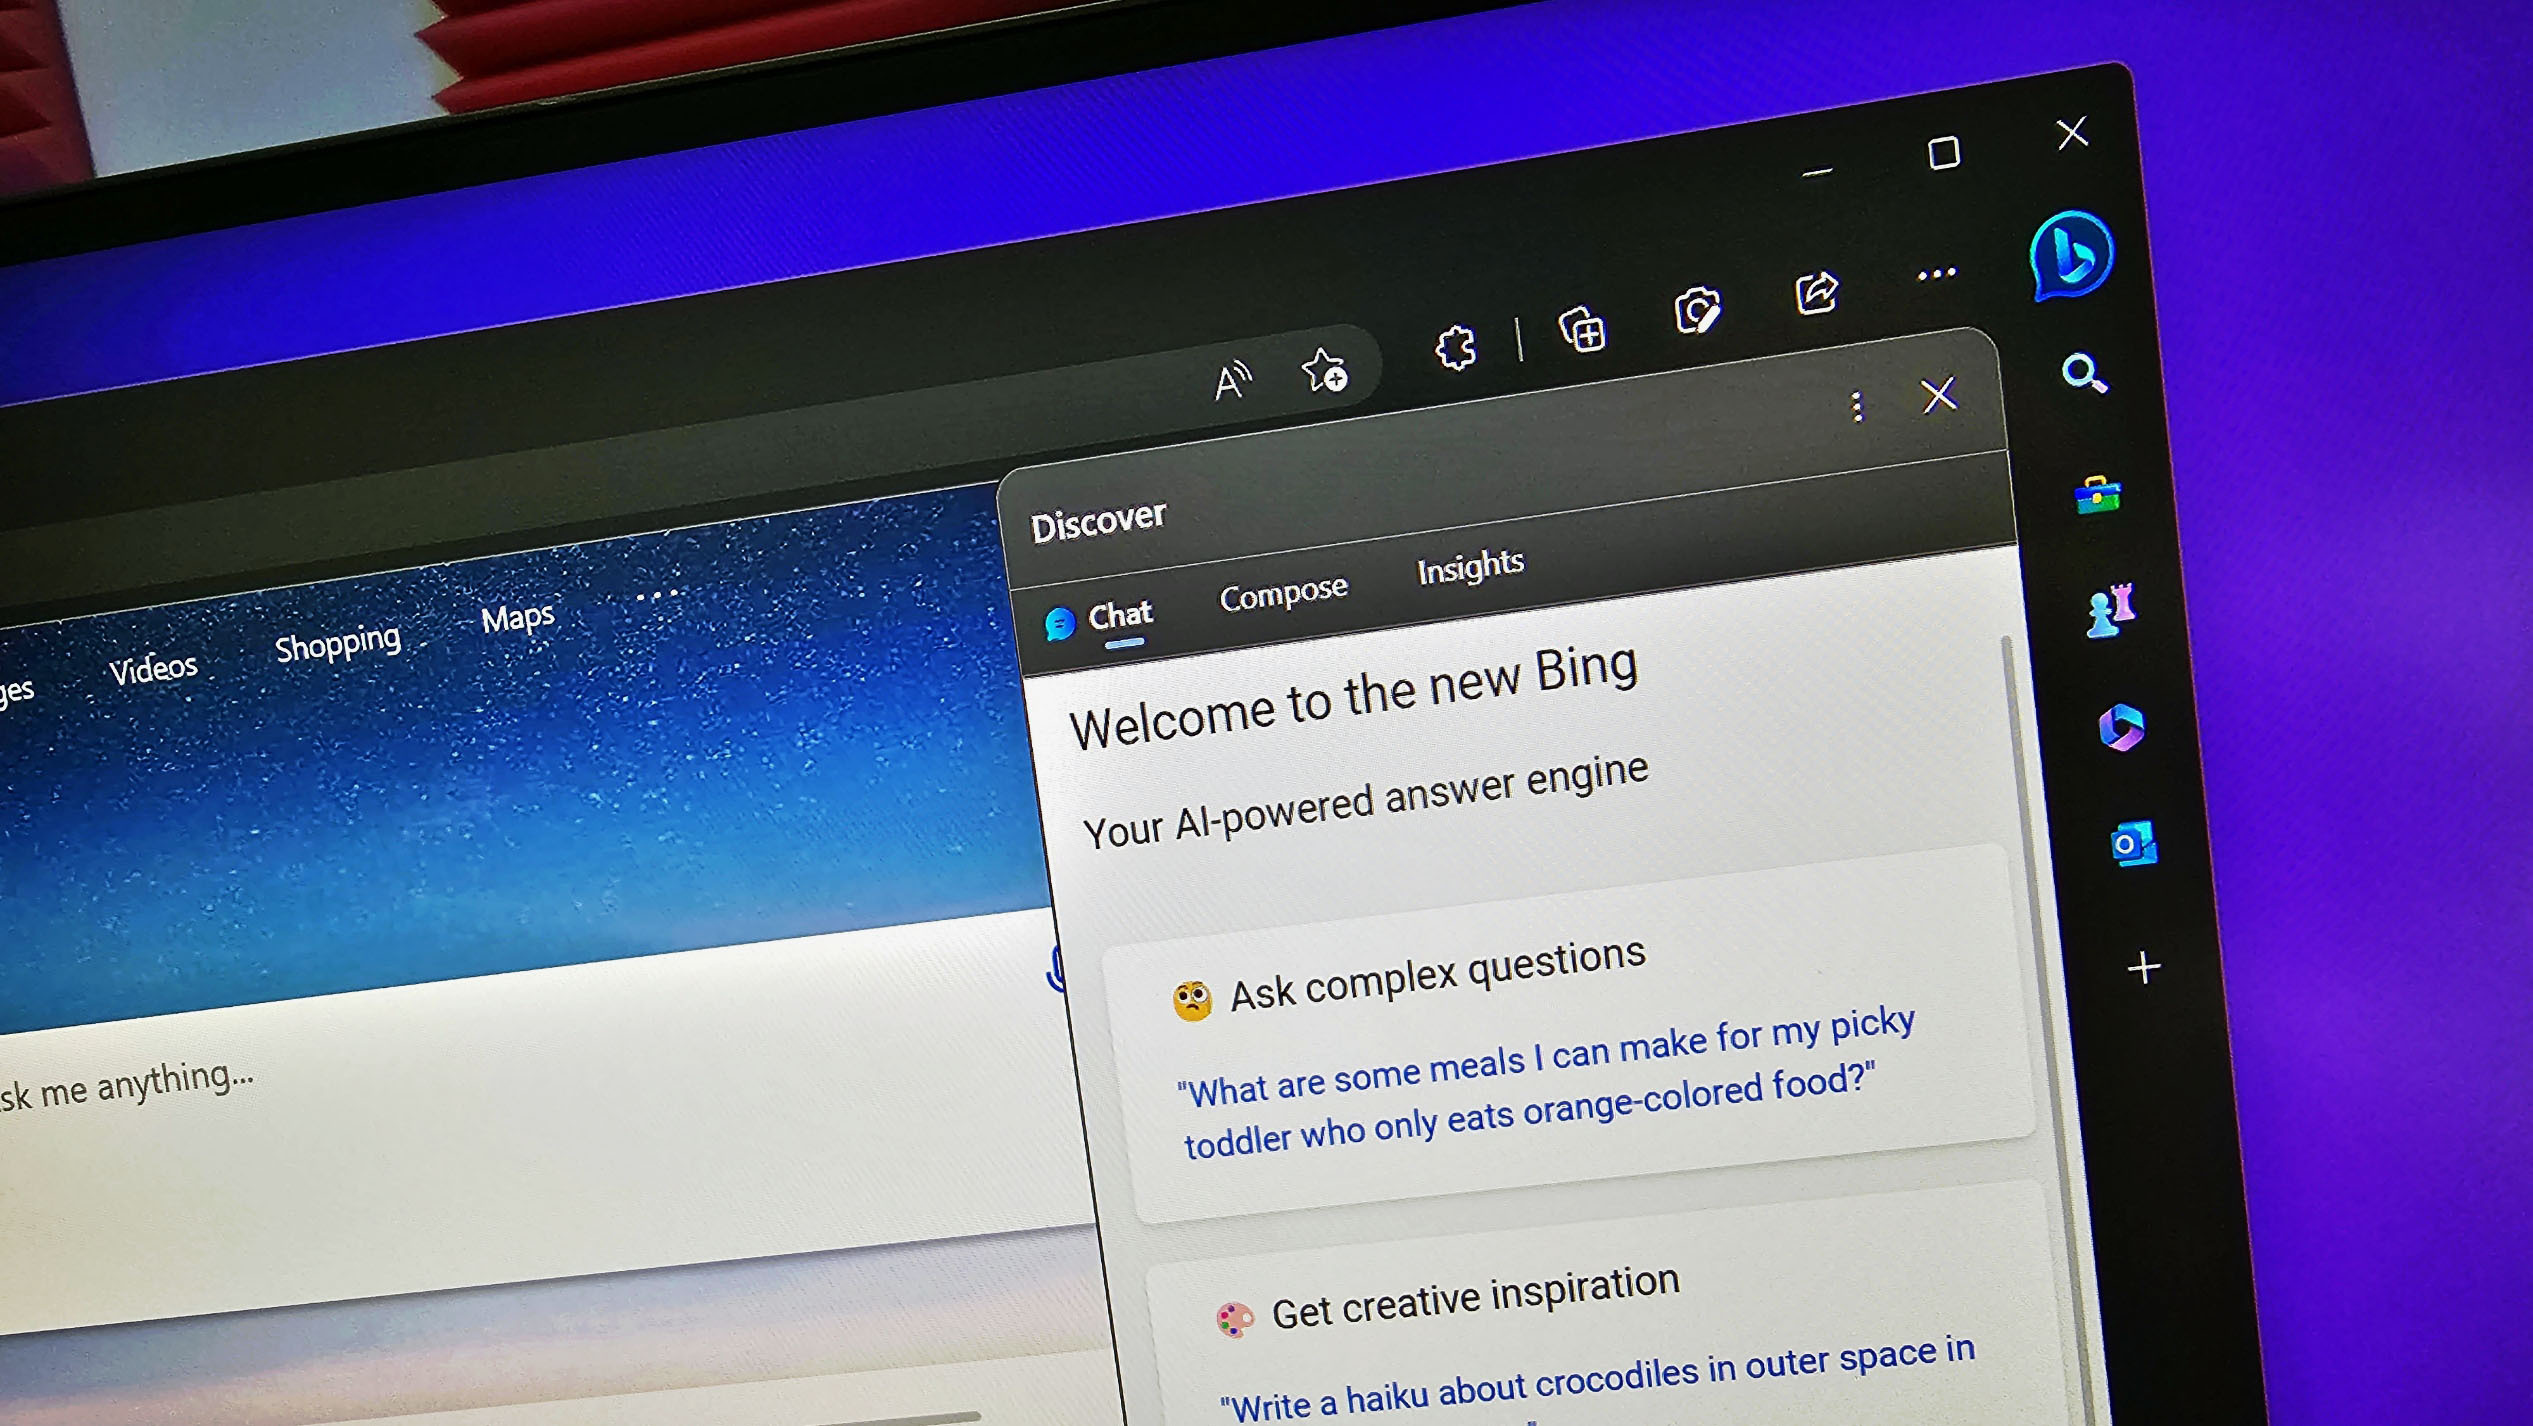 It appears anyone can now sign up for the new Bing, no waiting required